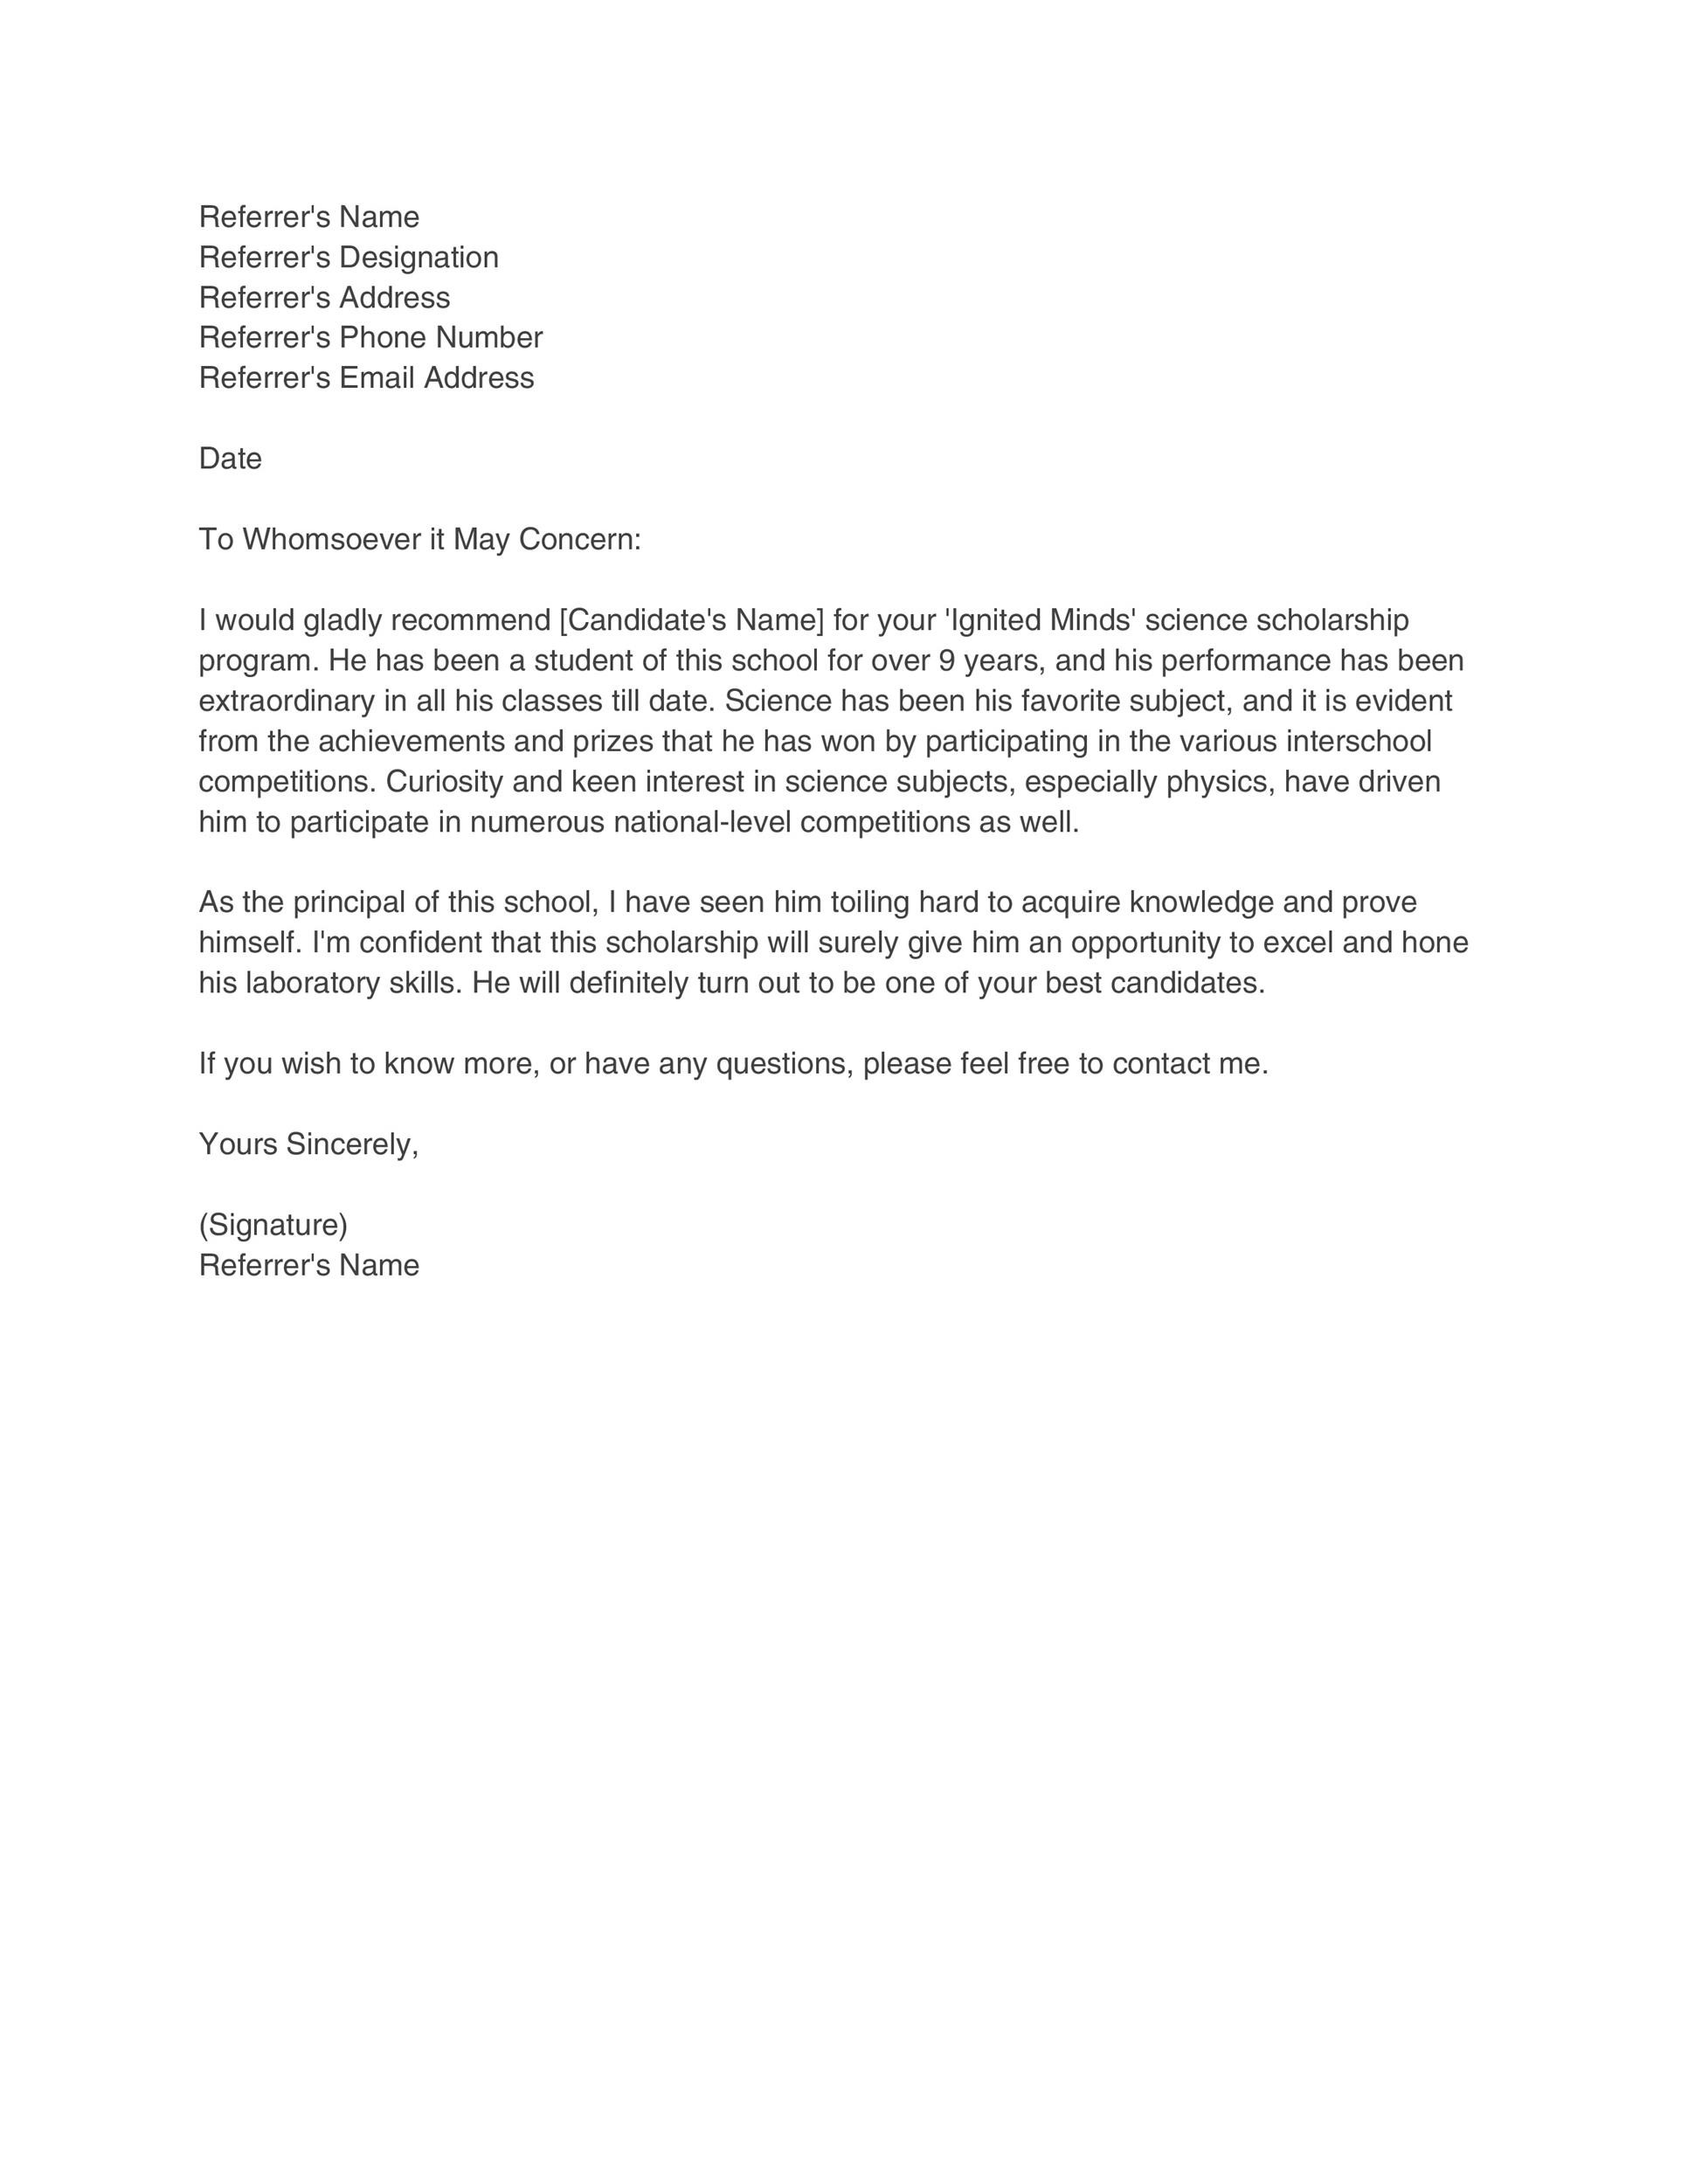 character-reference-letter-format-template